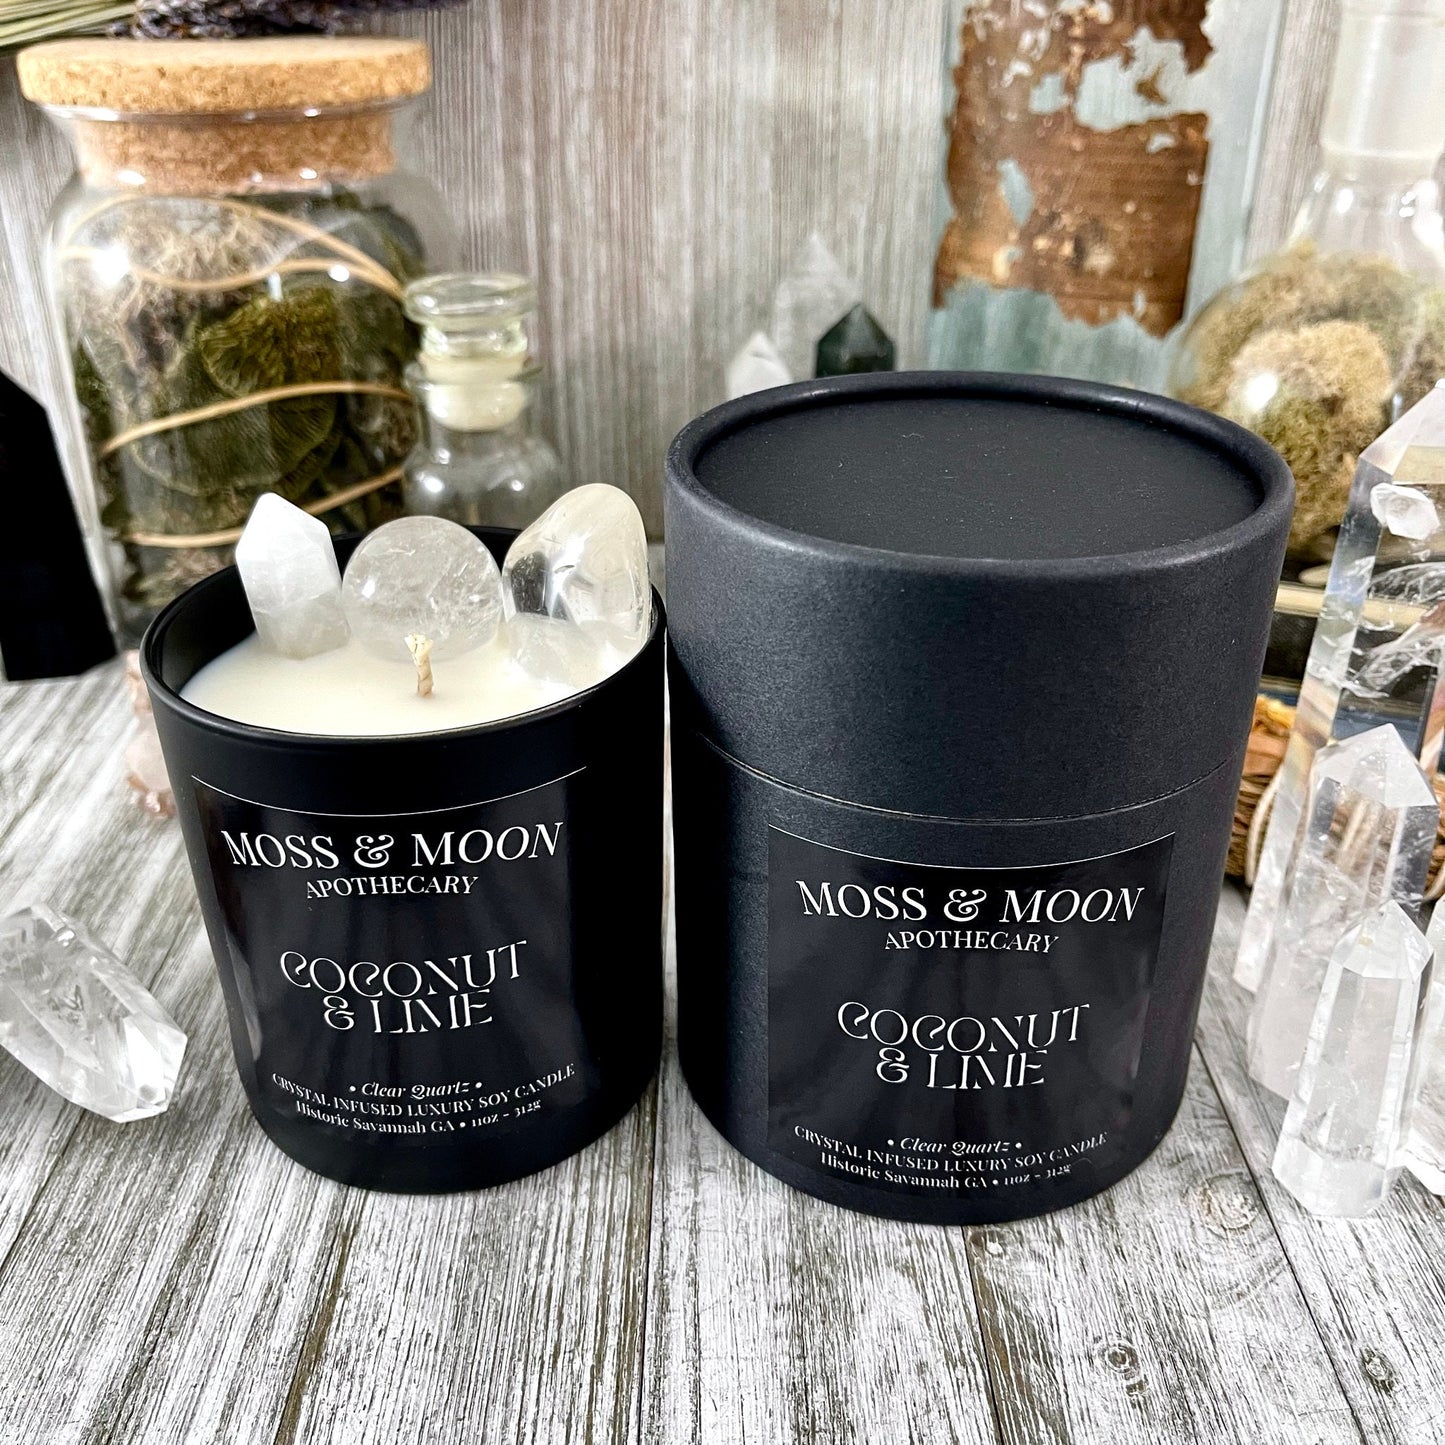 Coconut and Lime Candle with Clear Quartz - Moss & Moon Apothecary Crystal Infused Luxury Soy Candle